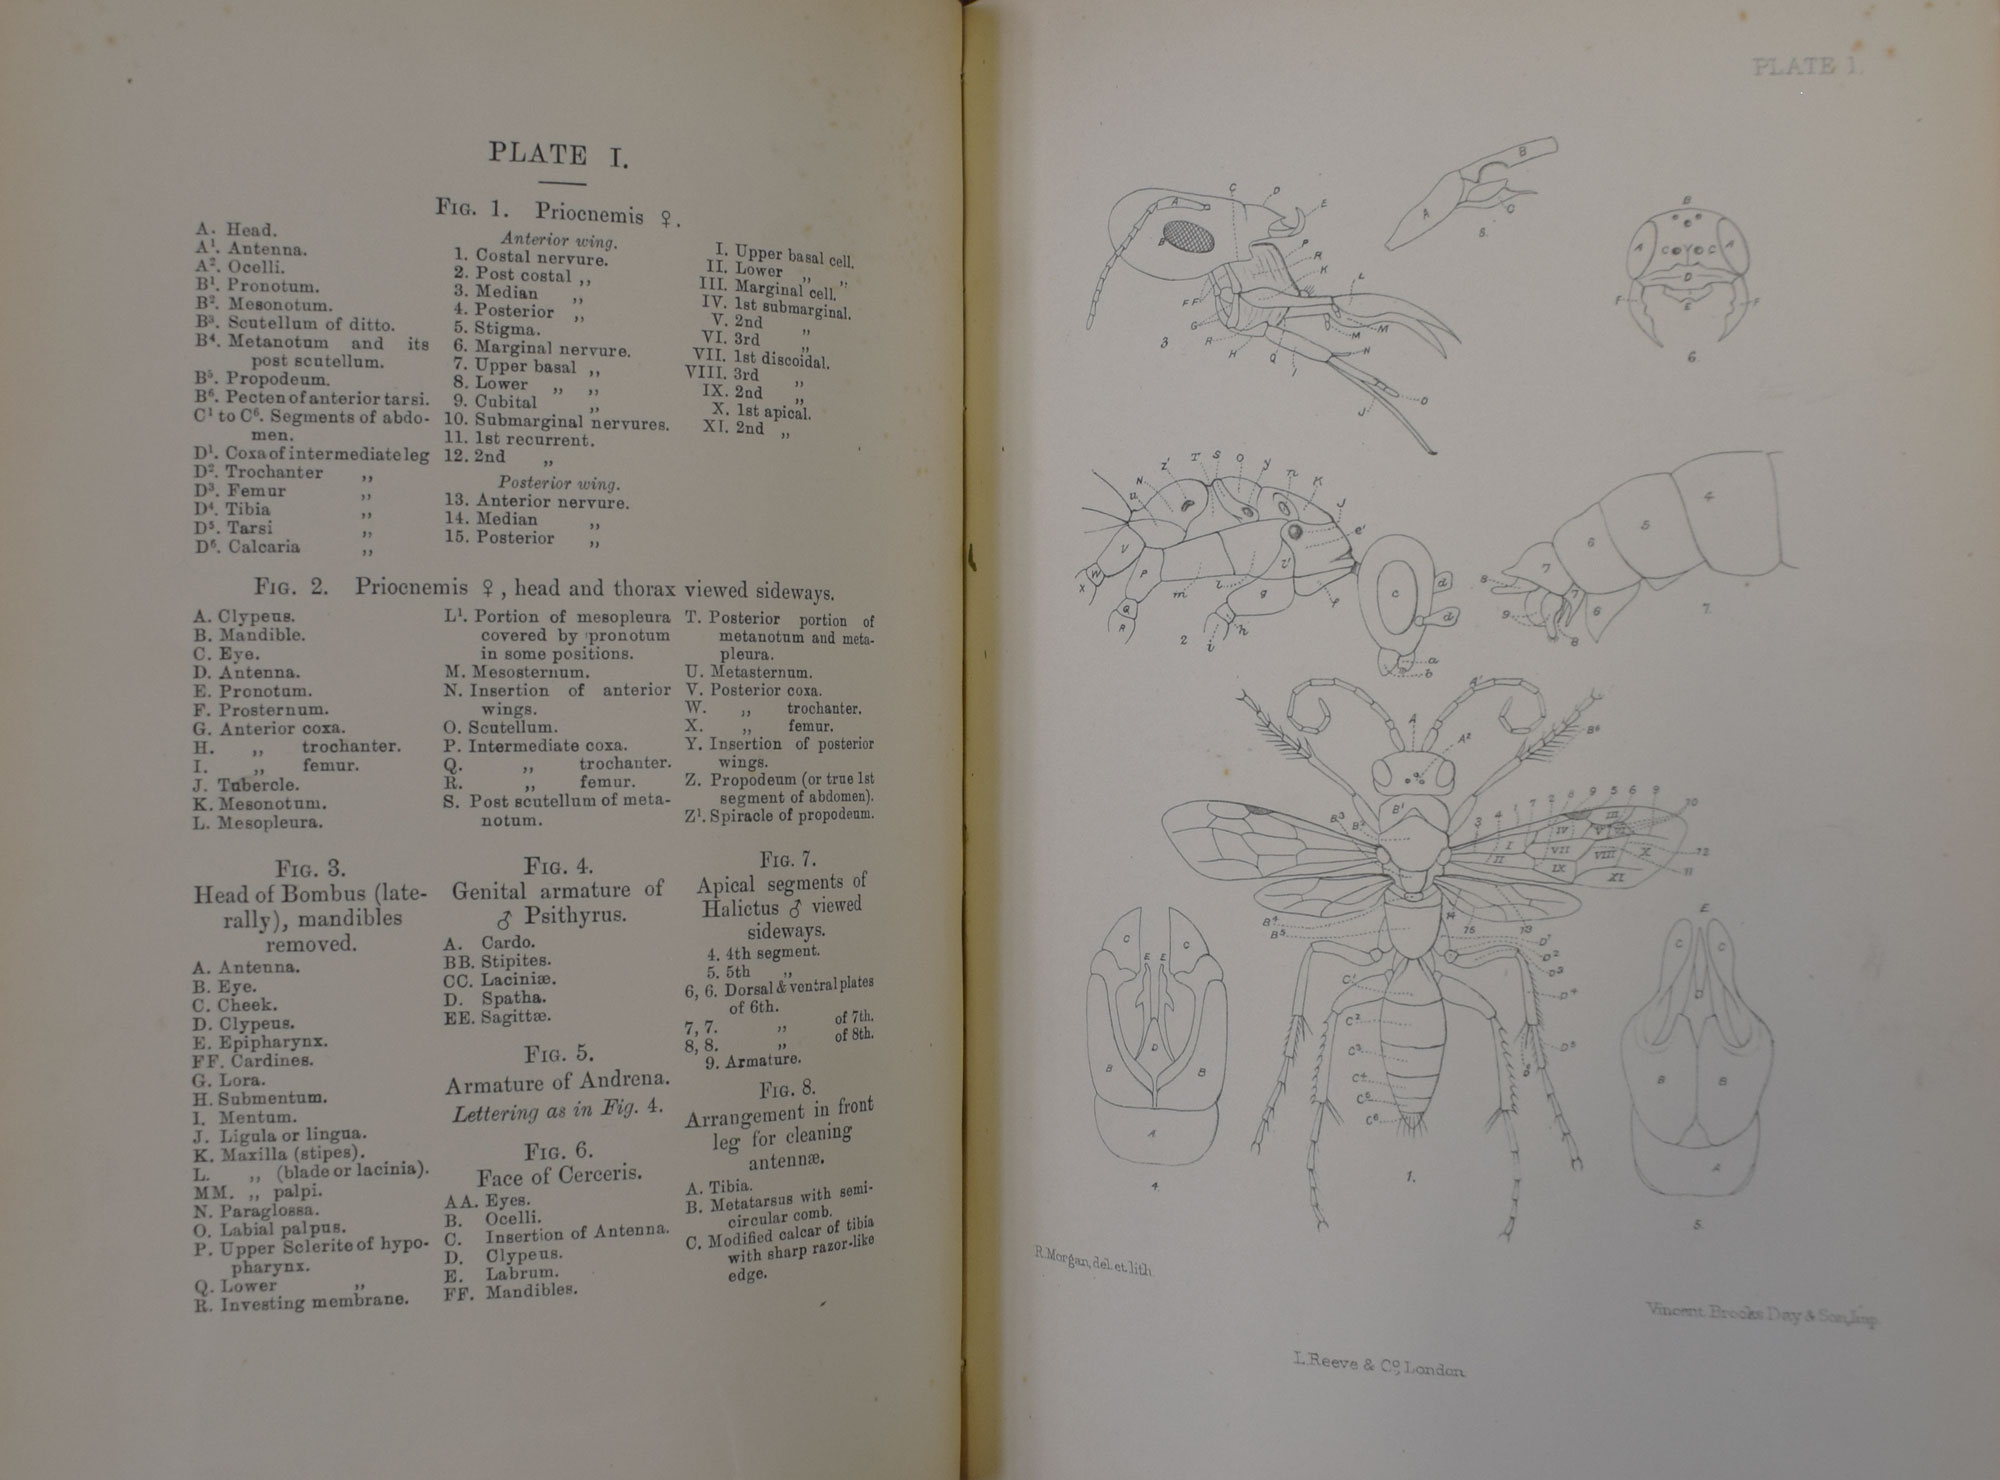 The Hymenoptera Aculeata of the British Islands. A Descriptive Account of the Families, Genera, and Species Indigenous to Great Britain and Ireland, with Notes as to Habits, Localities, Habitats, etc. Colour plate edition.